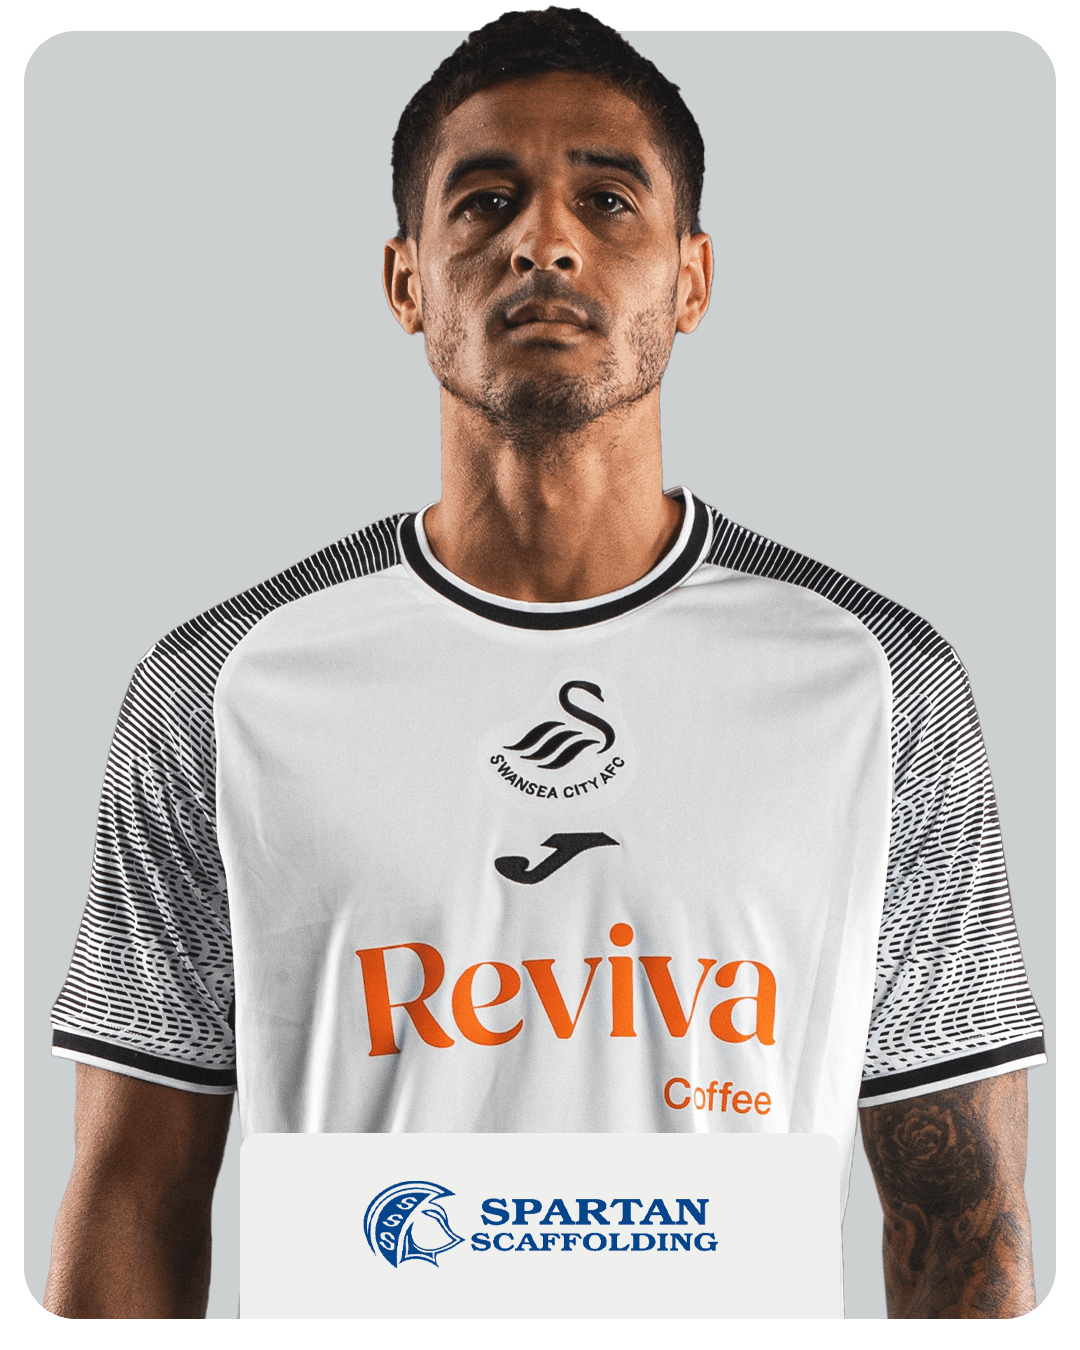 Kyle Naughton, Sponsored by Spartan Scaffolding Solutions